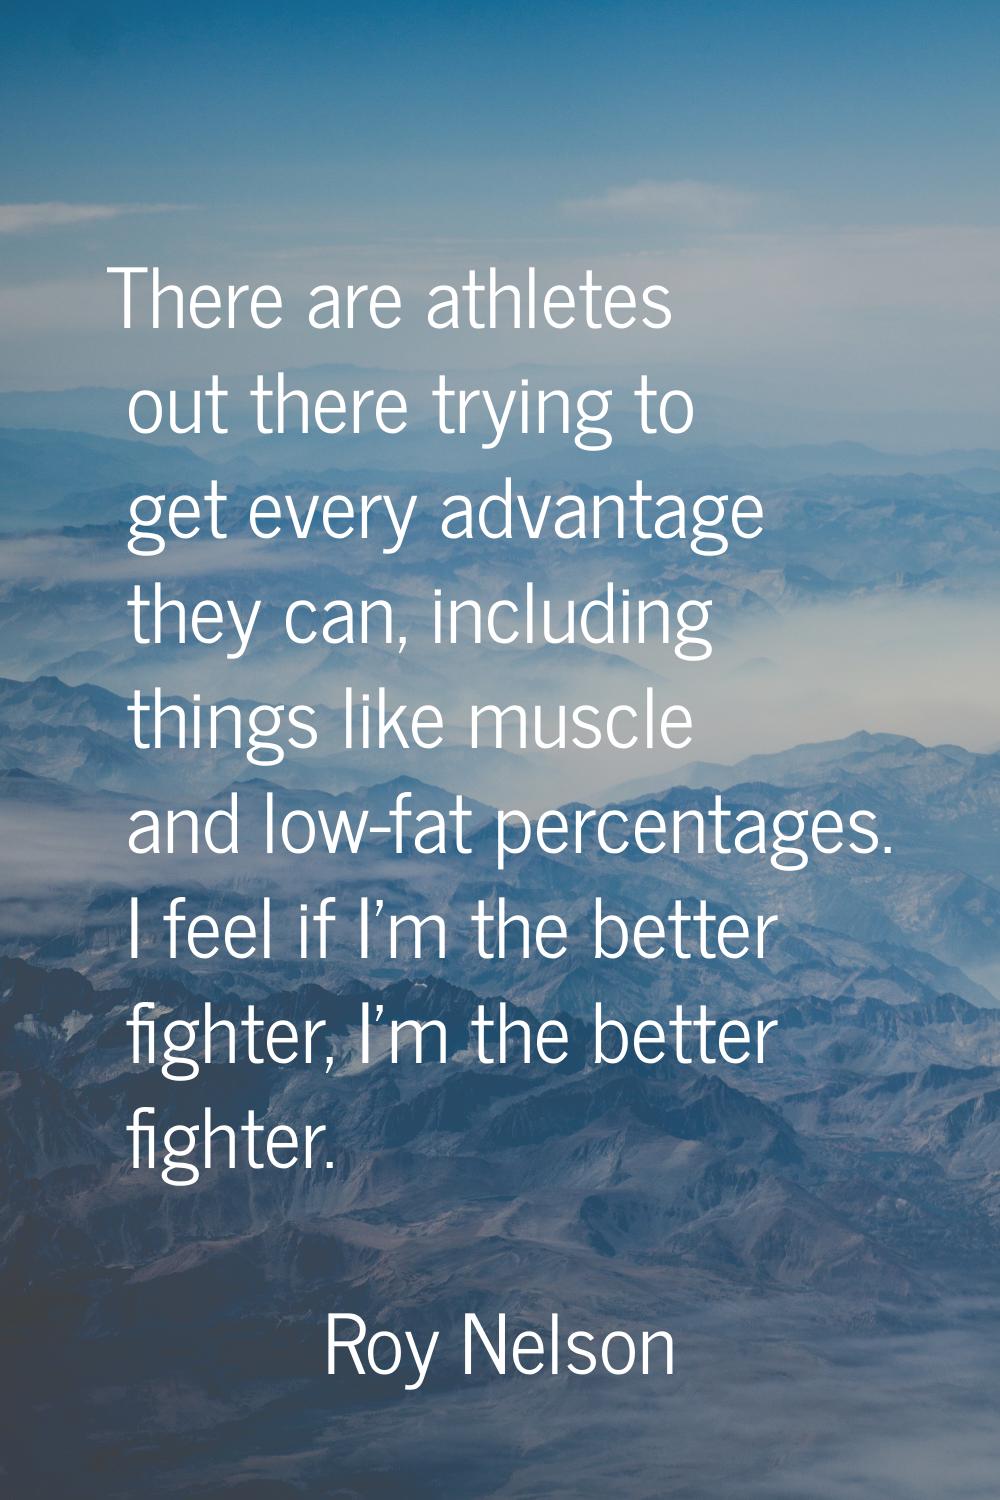 There are athletes out there trying to get every advantage they can, including things like muscle a